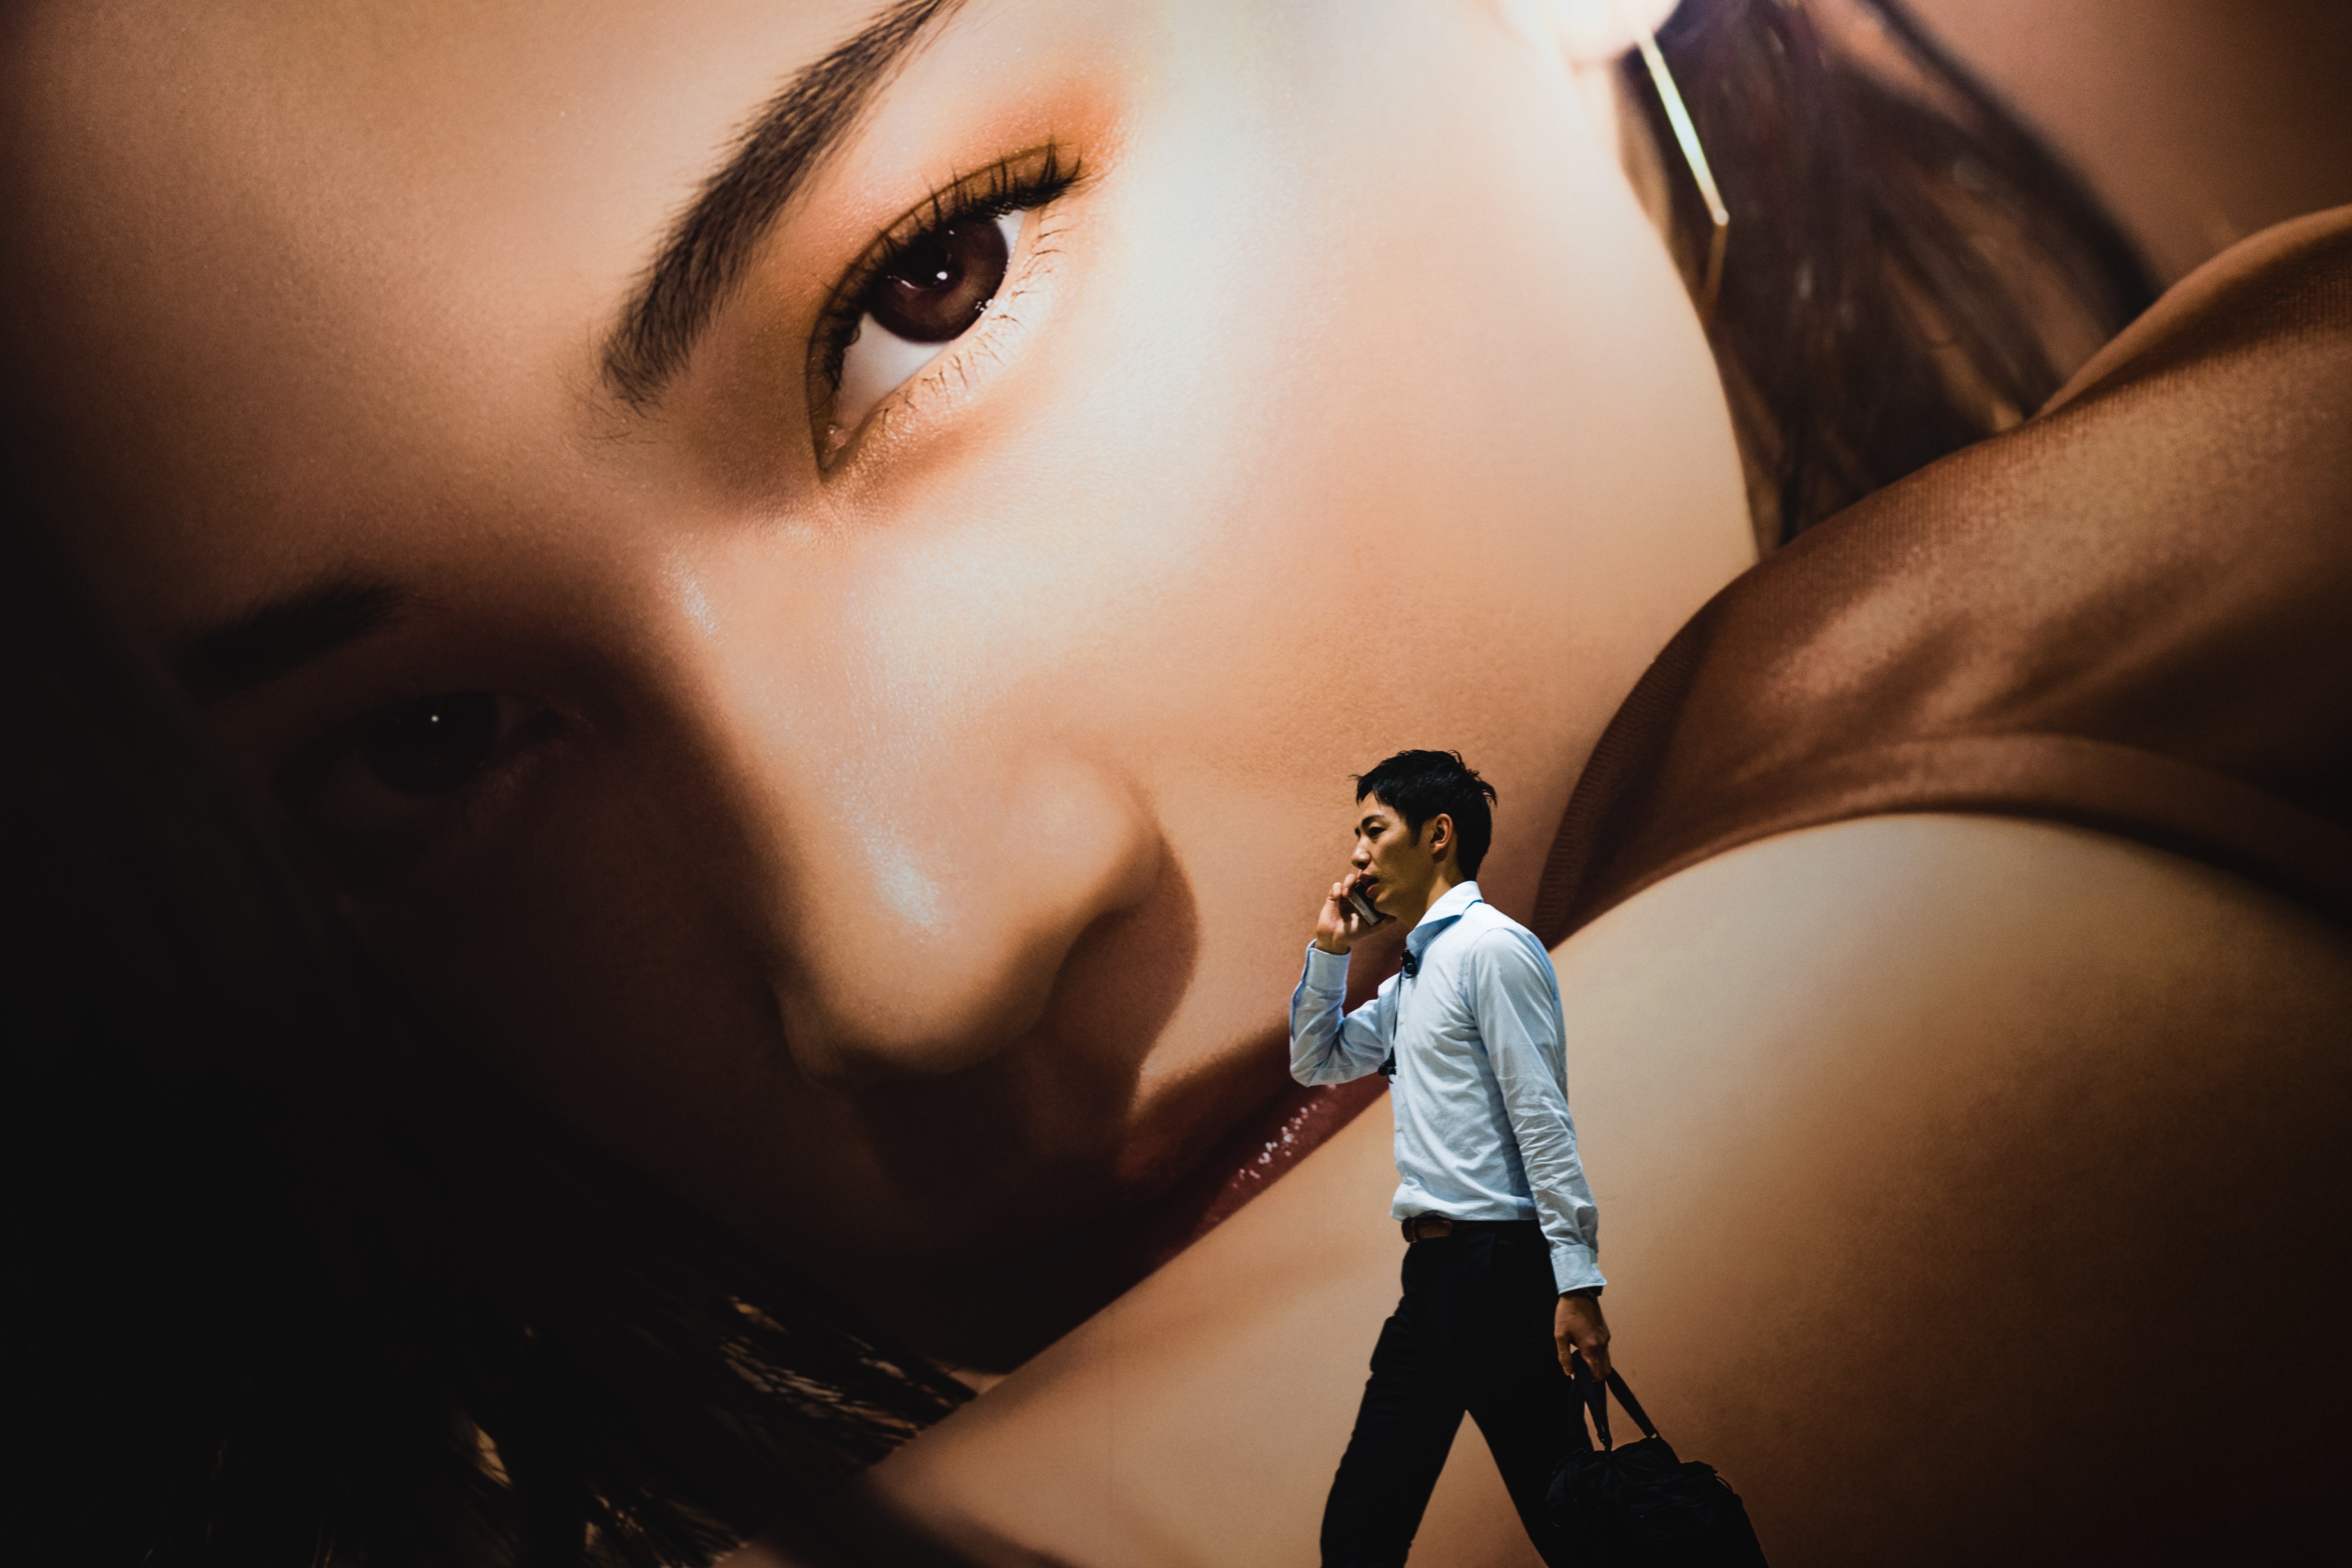 A man on a cellphone walks in front of an enormous image of a woman's face and arm.